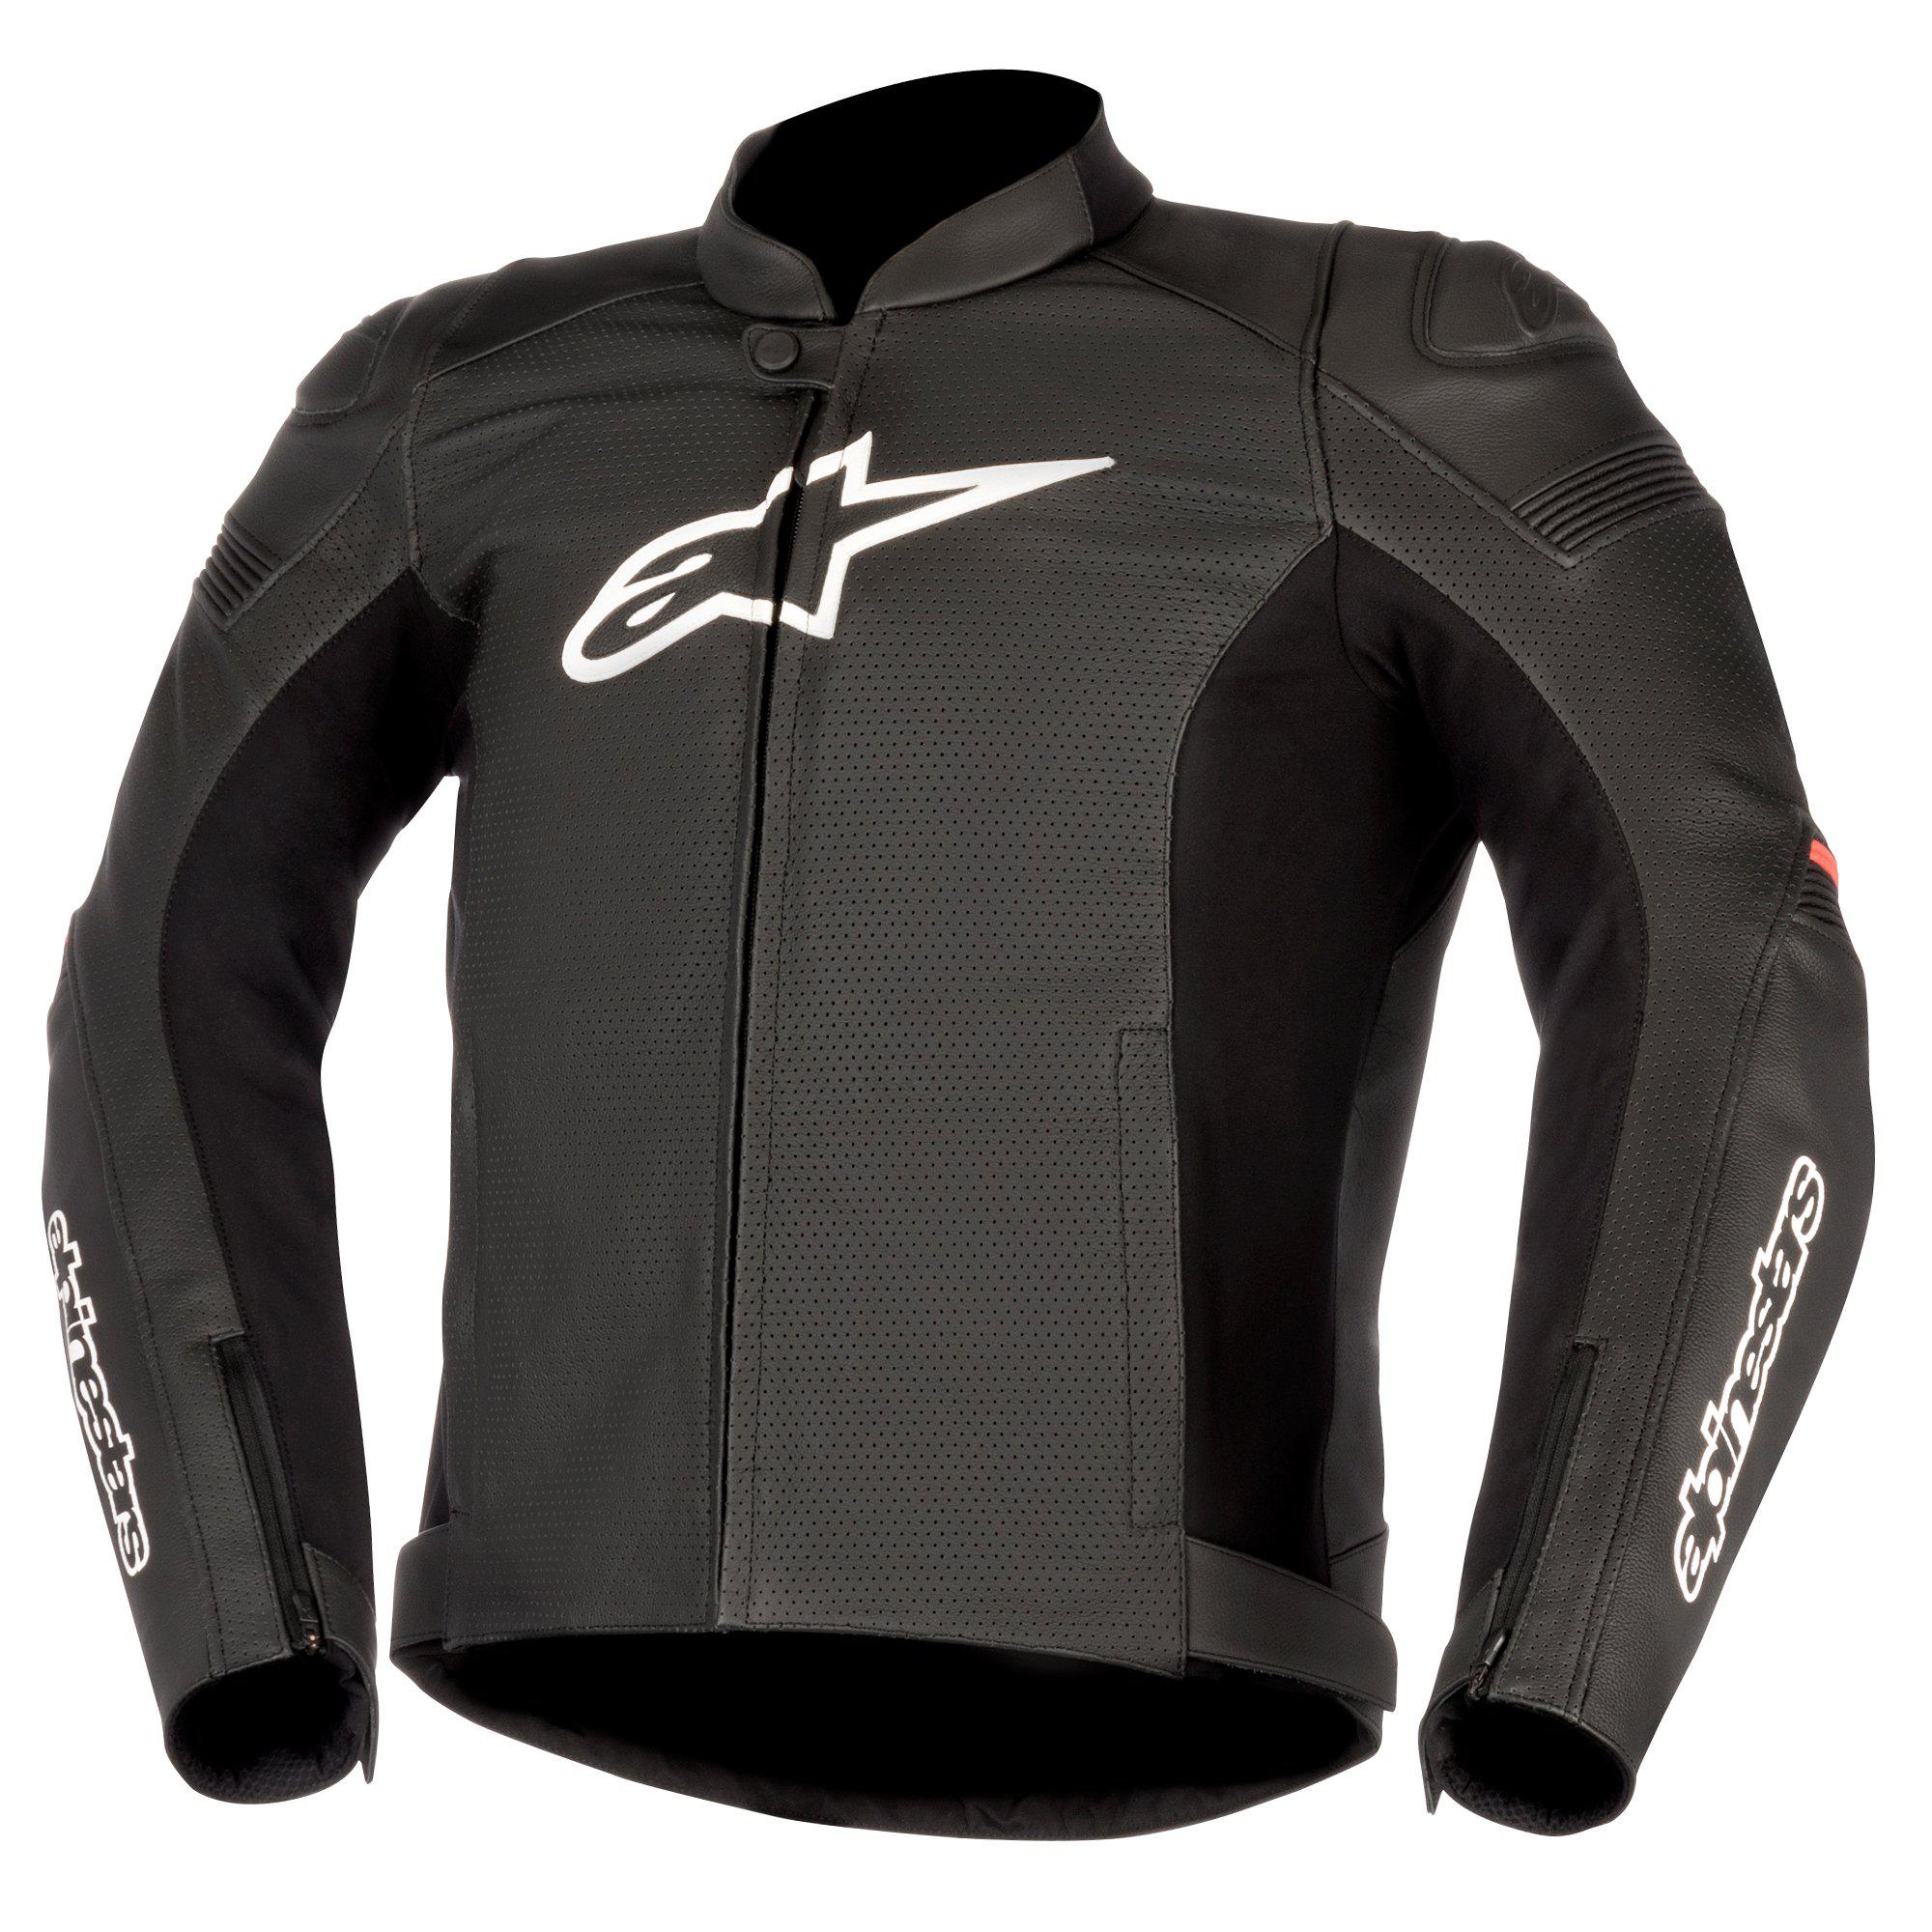 SP-1 Airflow Leather Jacket